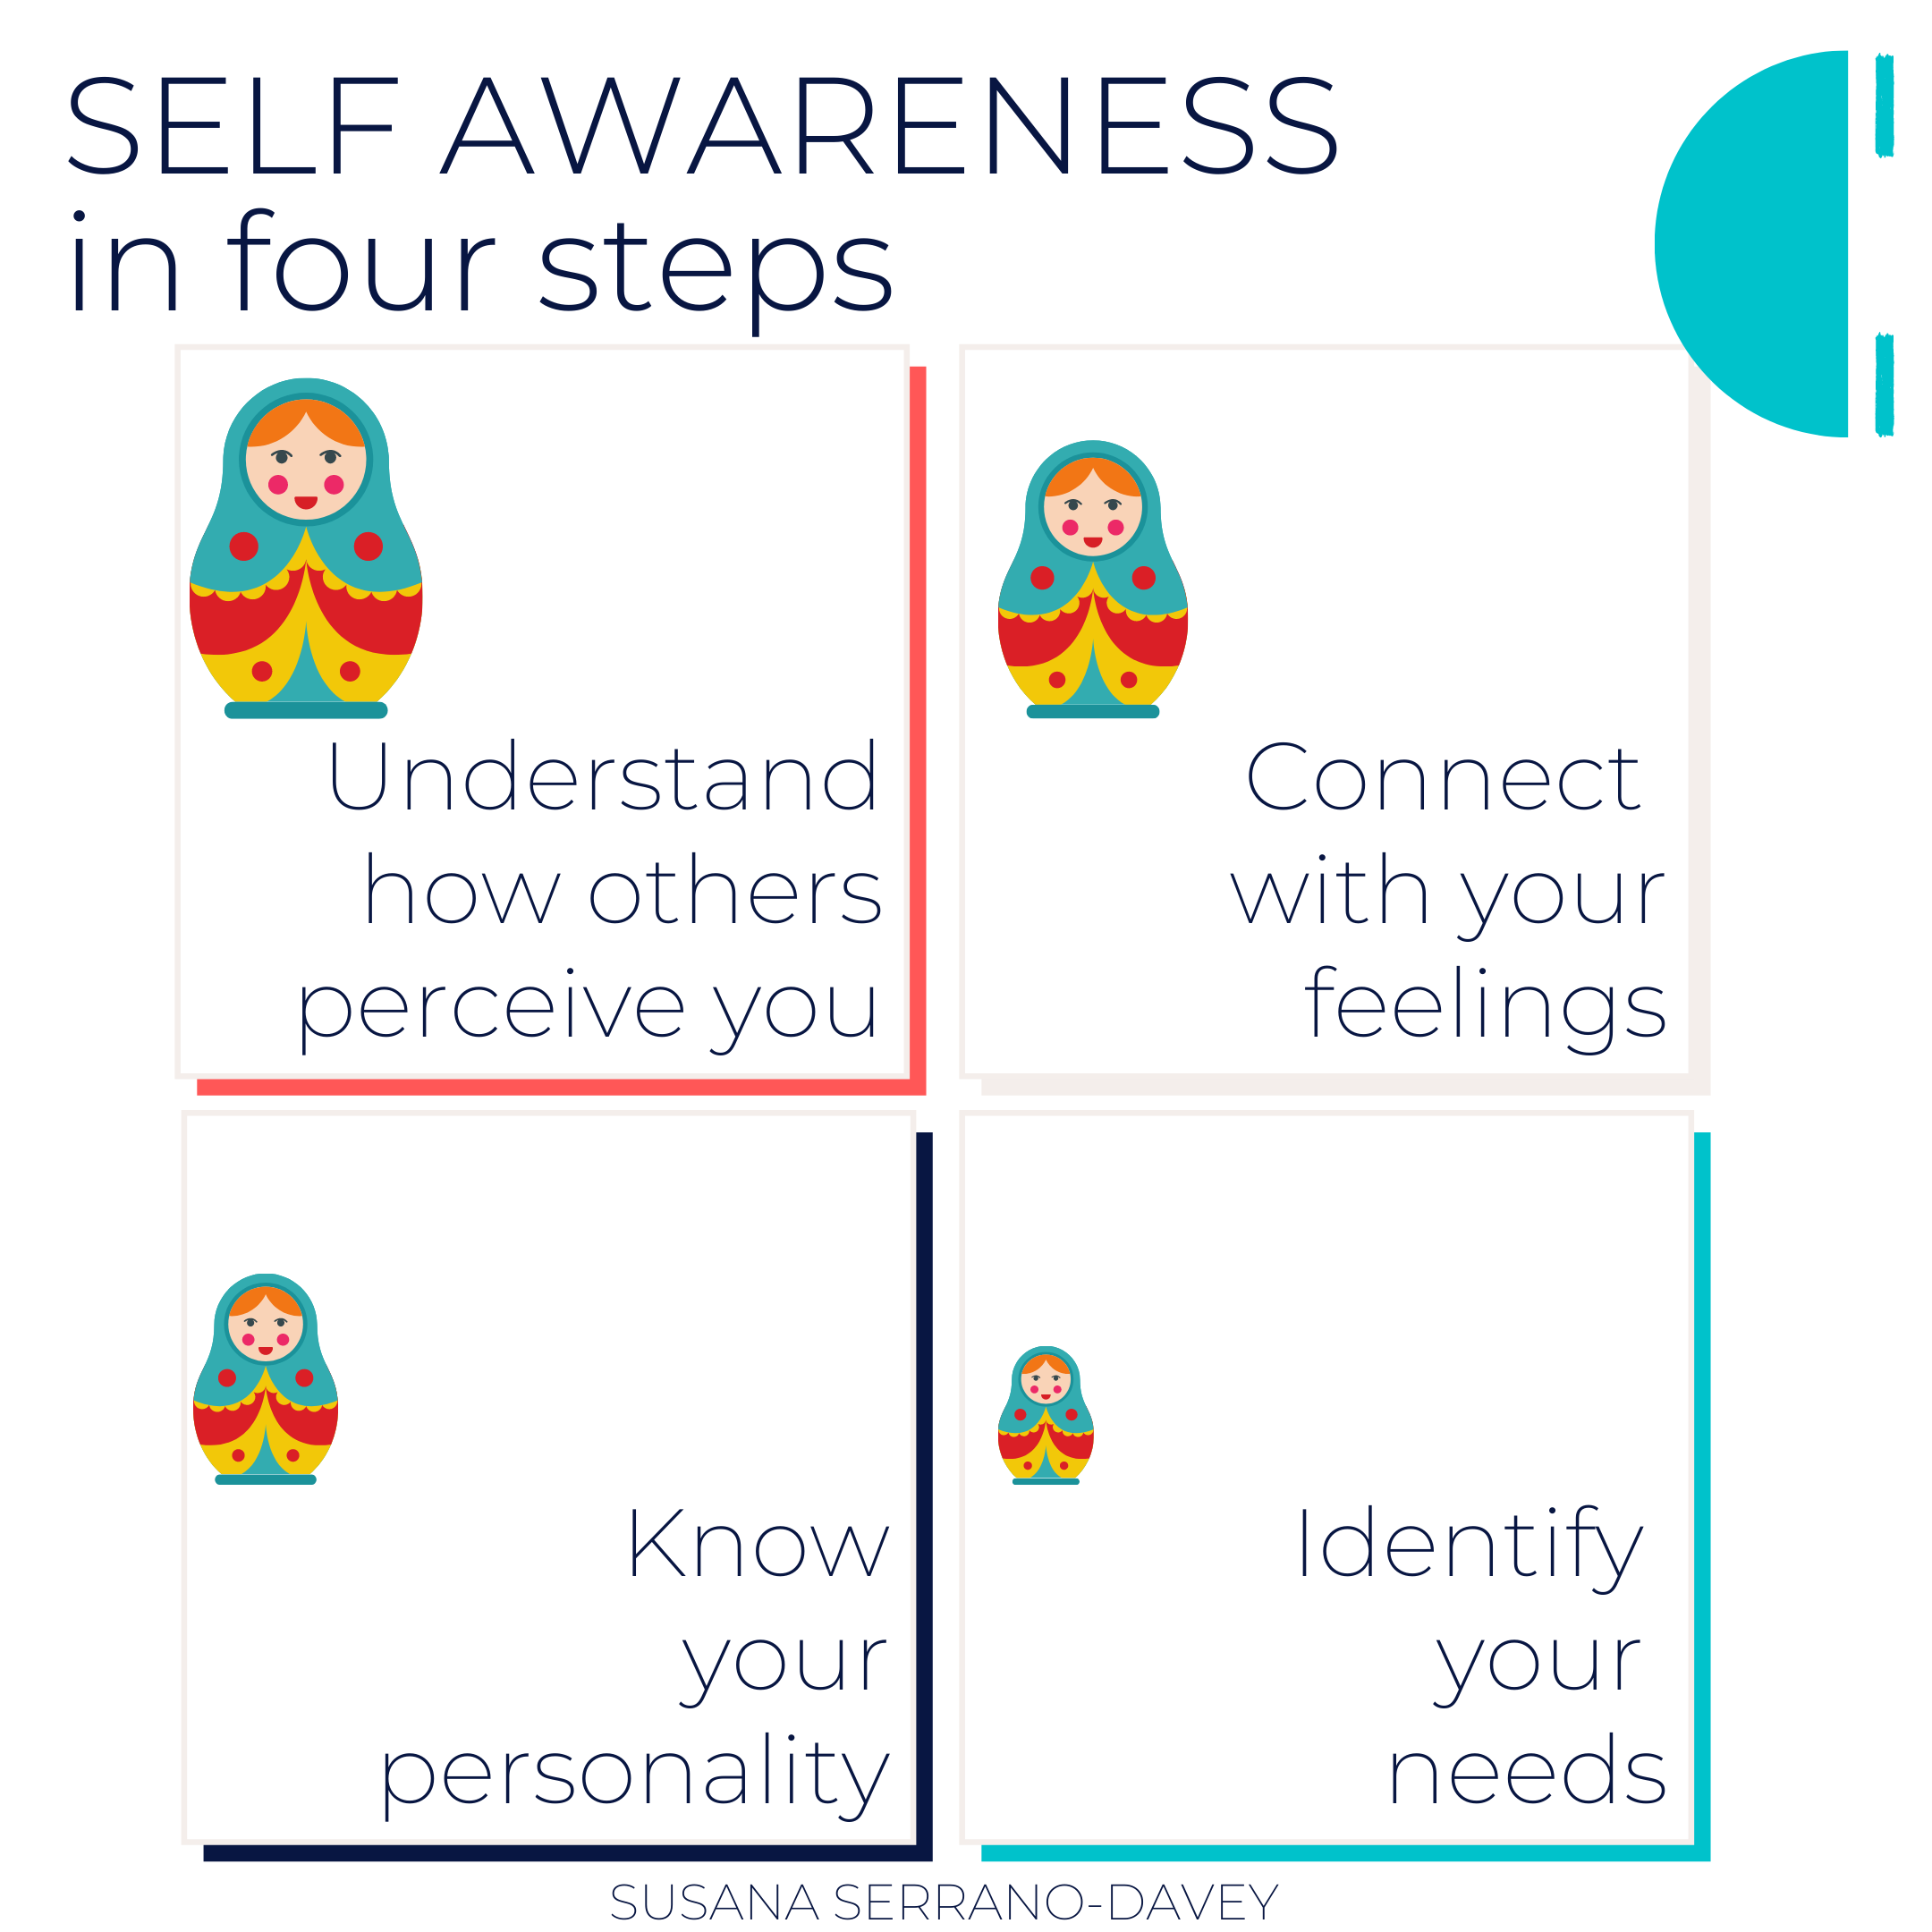 How to develop self-awareness